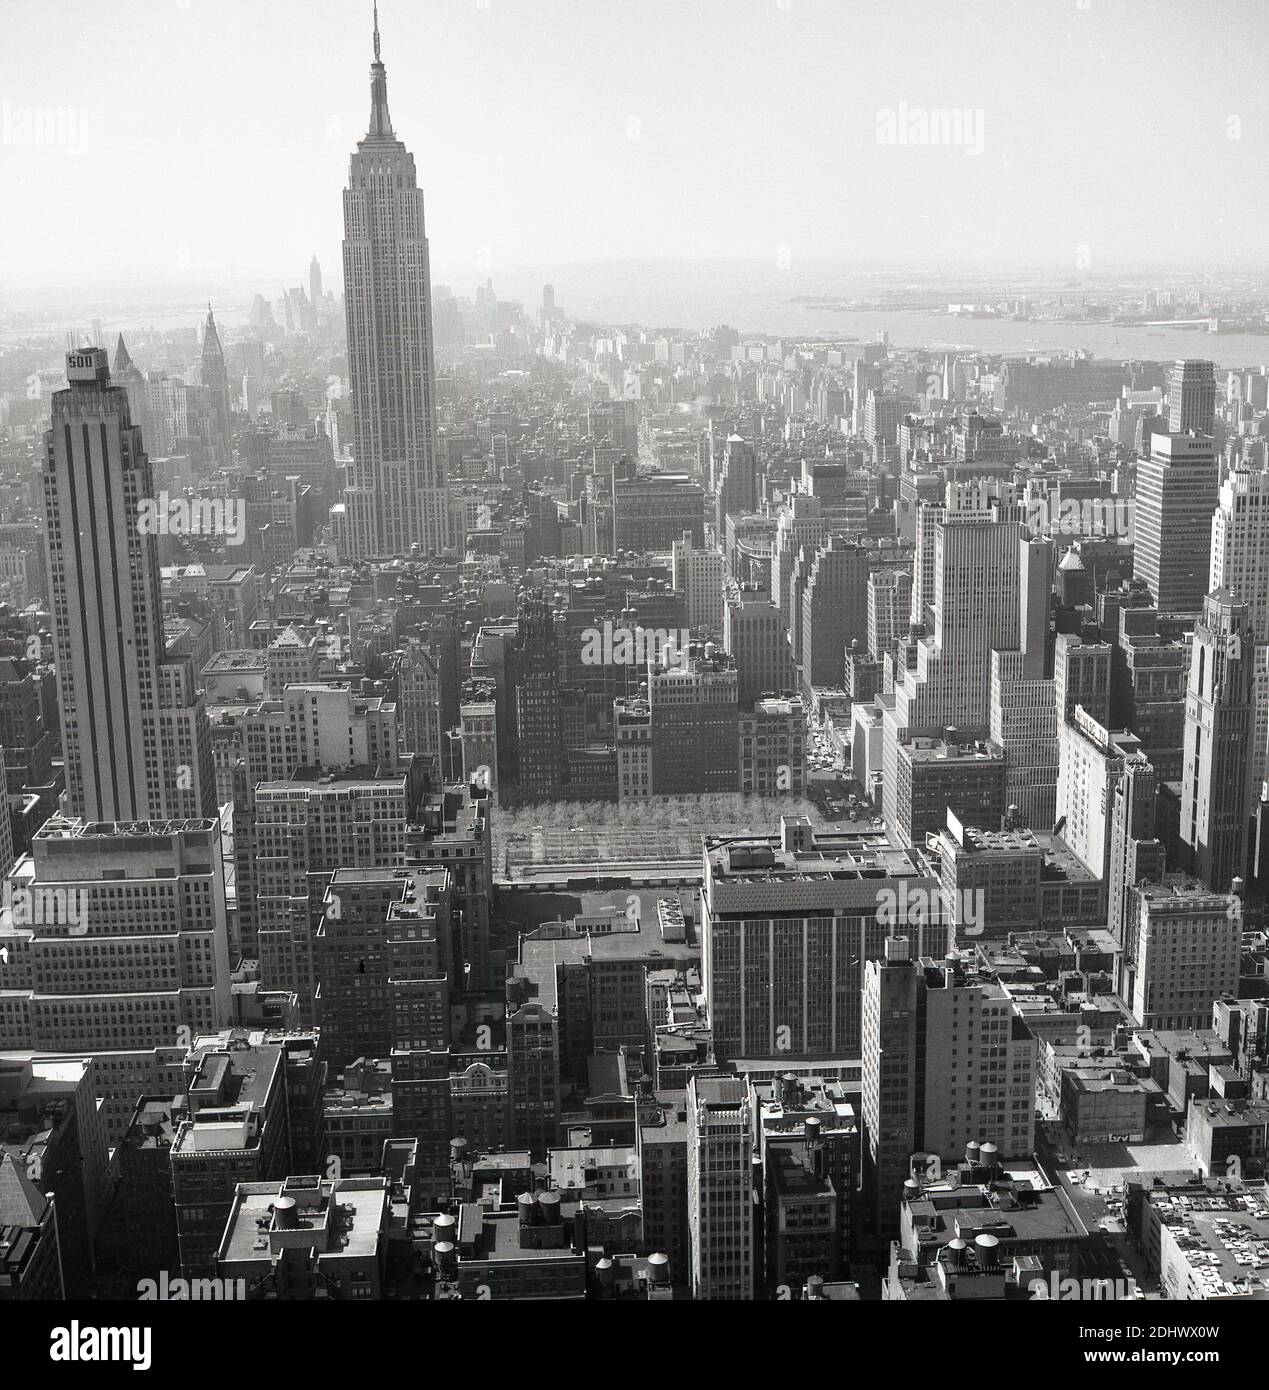 1960s, historical aerial view over Manhattan, New York city, showing the Tower blocks and skyscrapers. Stock Photo